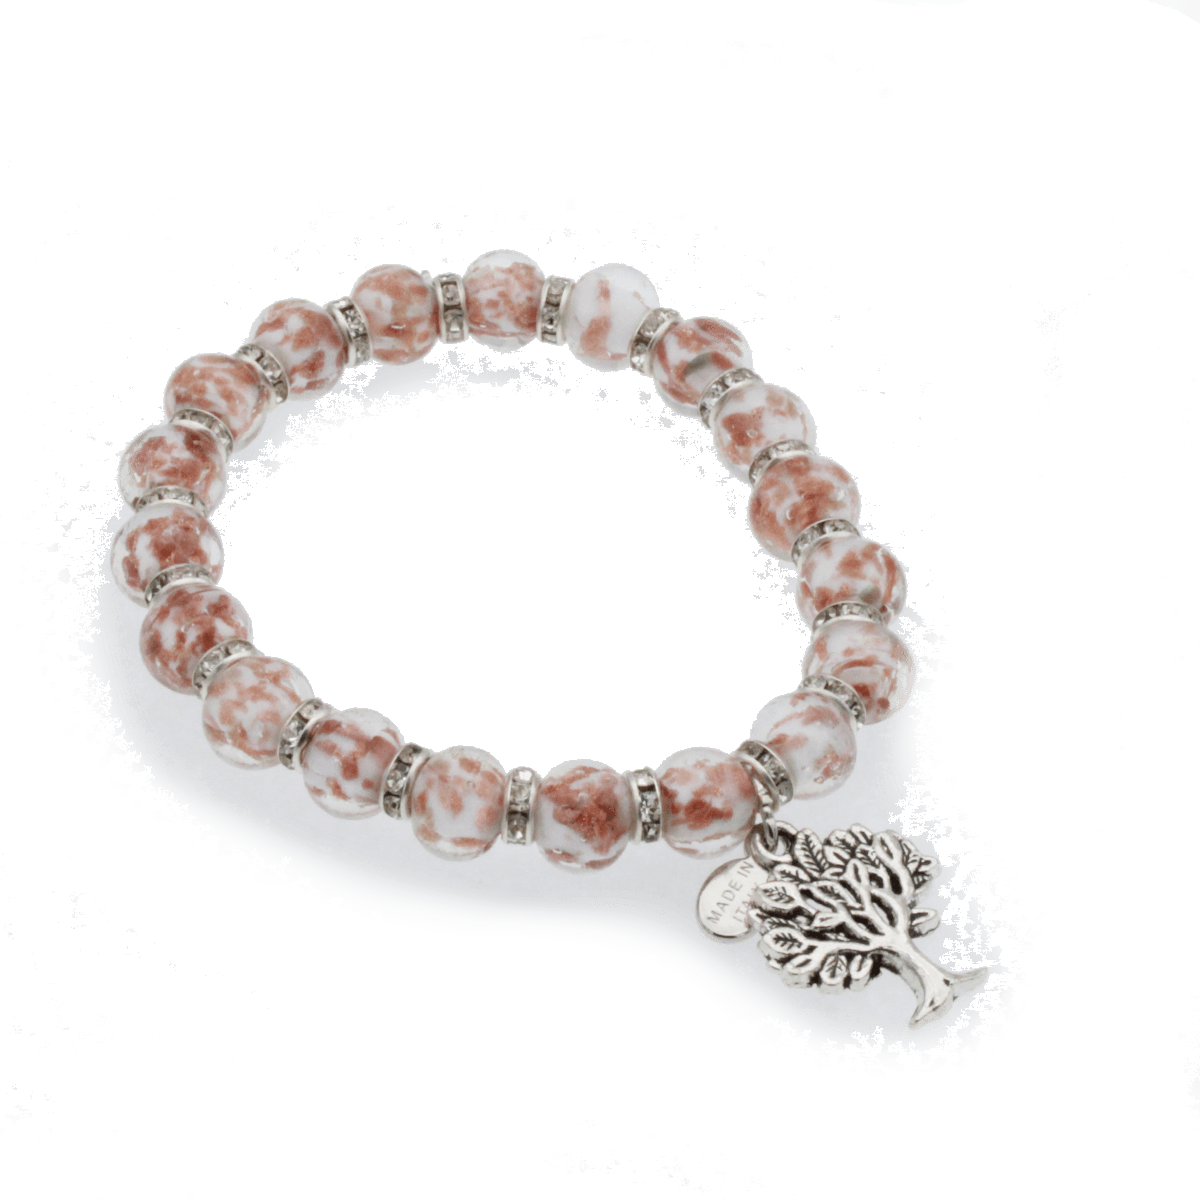 Stretch bracelet cream color Murano glass beads with shining copper infusion and a tree of life silver charm